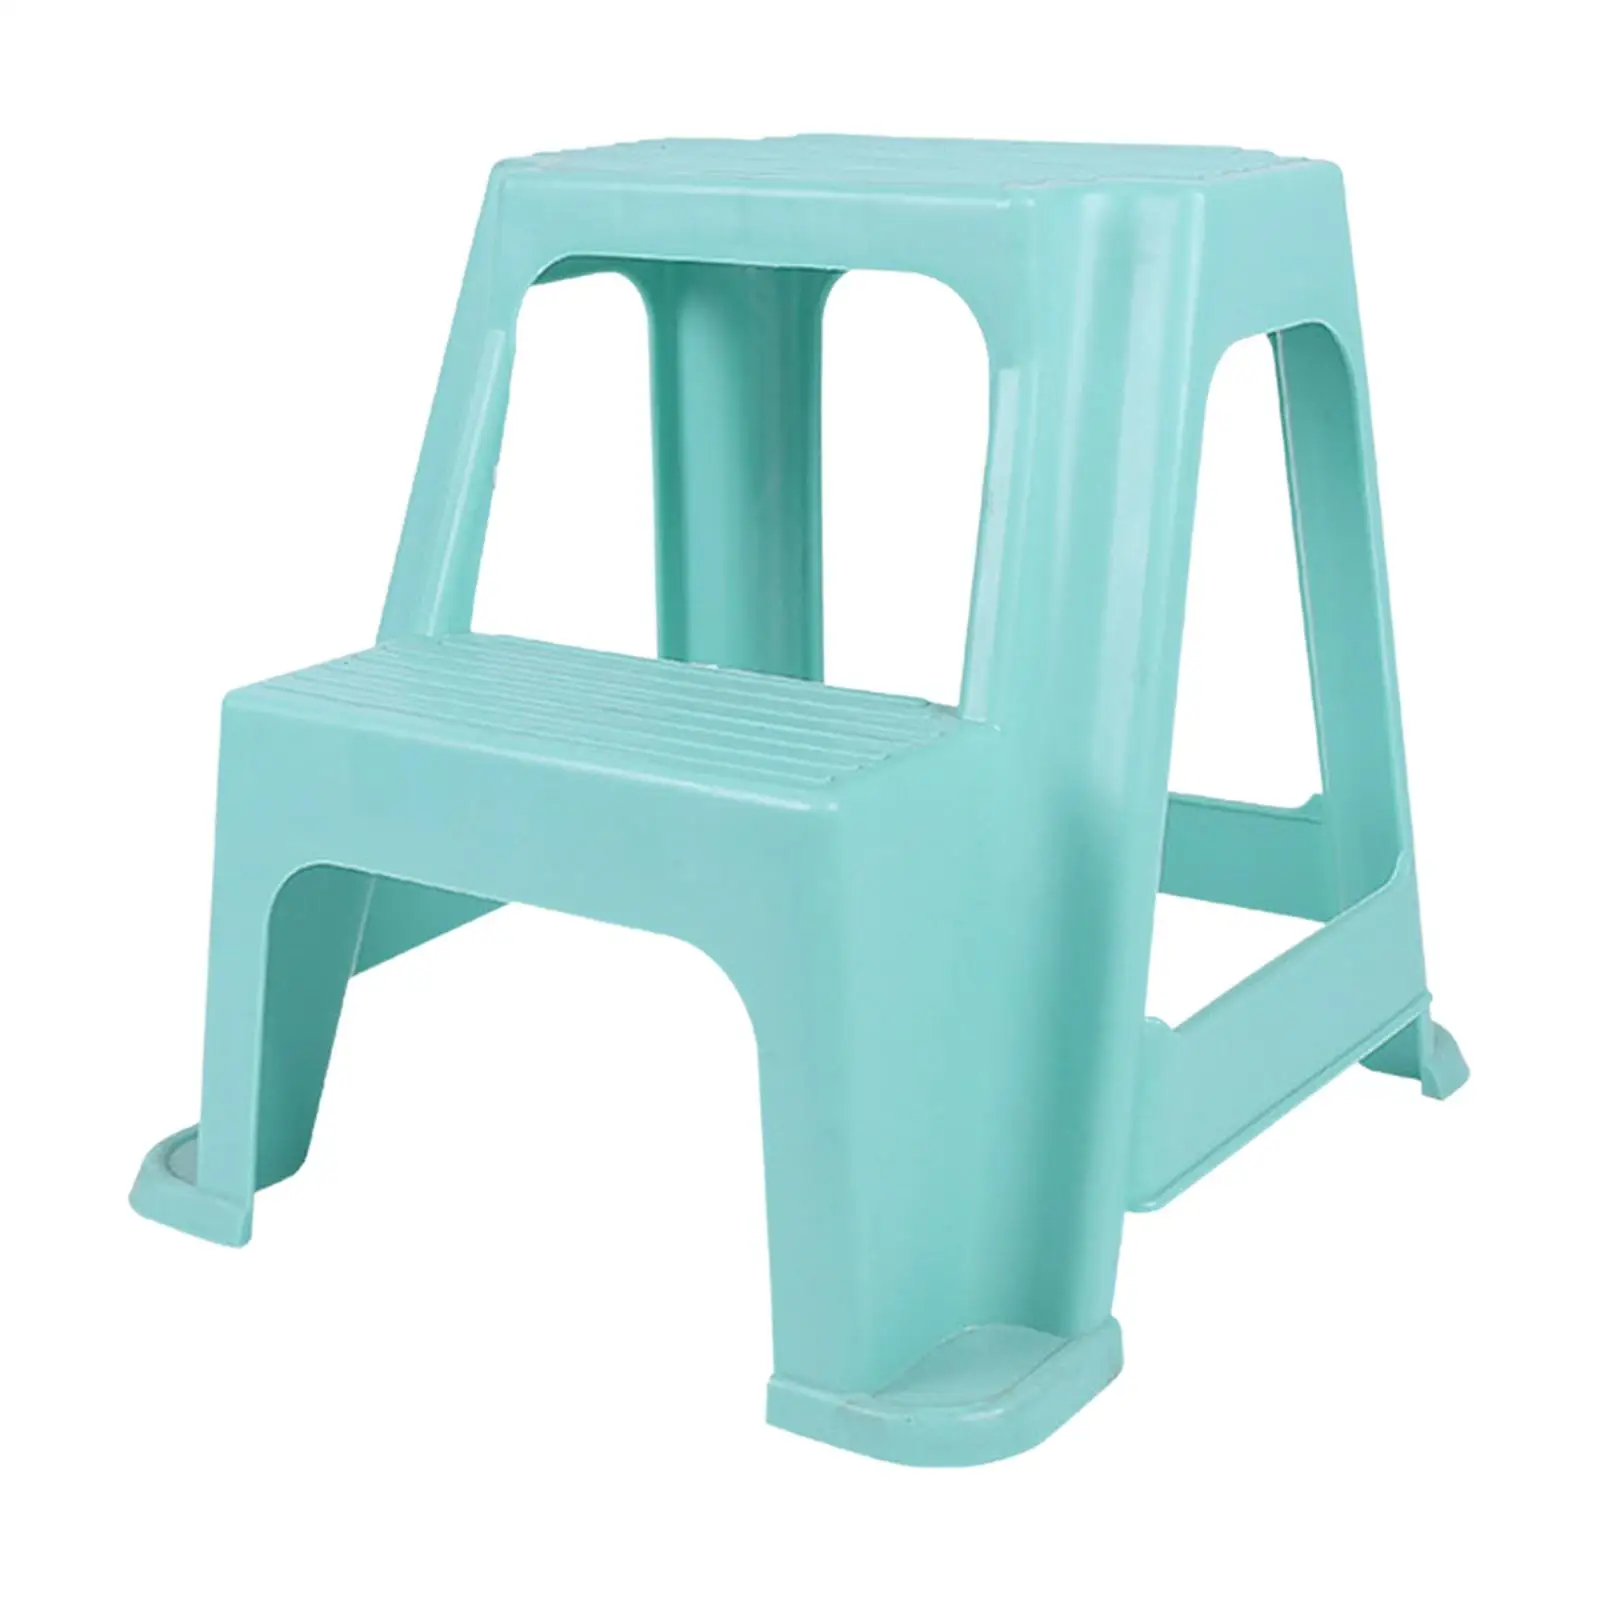 Two Step Stool Stepping Stool Anti Slip 2 Step Stool Double up Step Stool Stepstool for Kids Children Adults Pets Potty Training